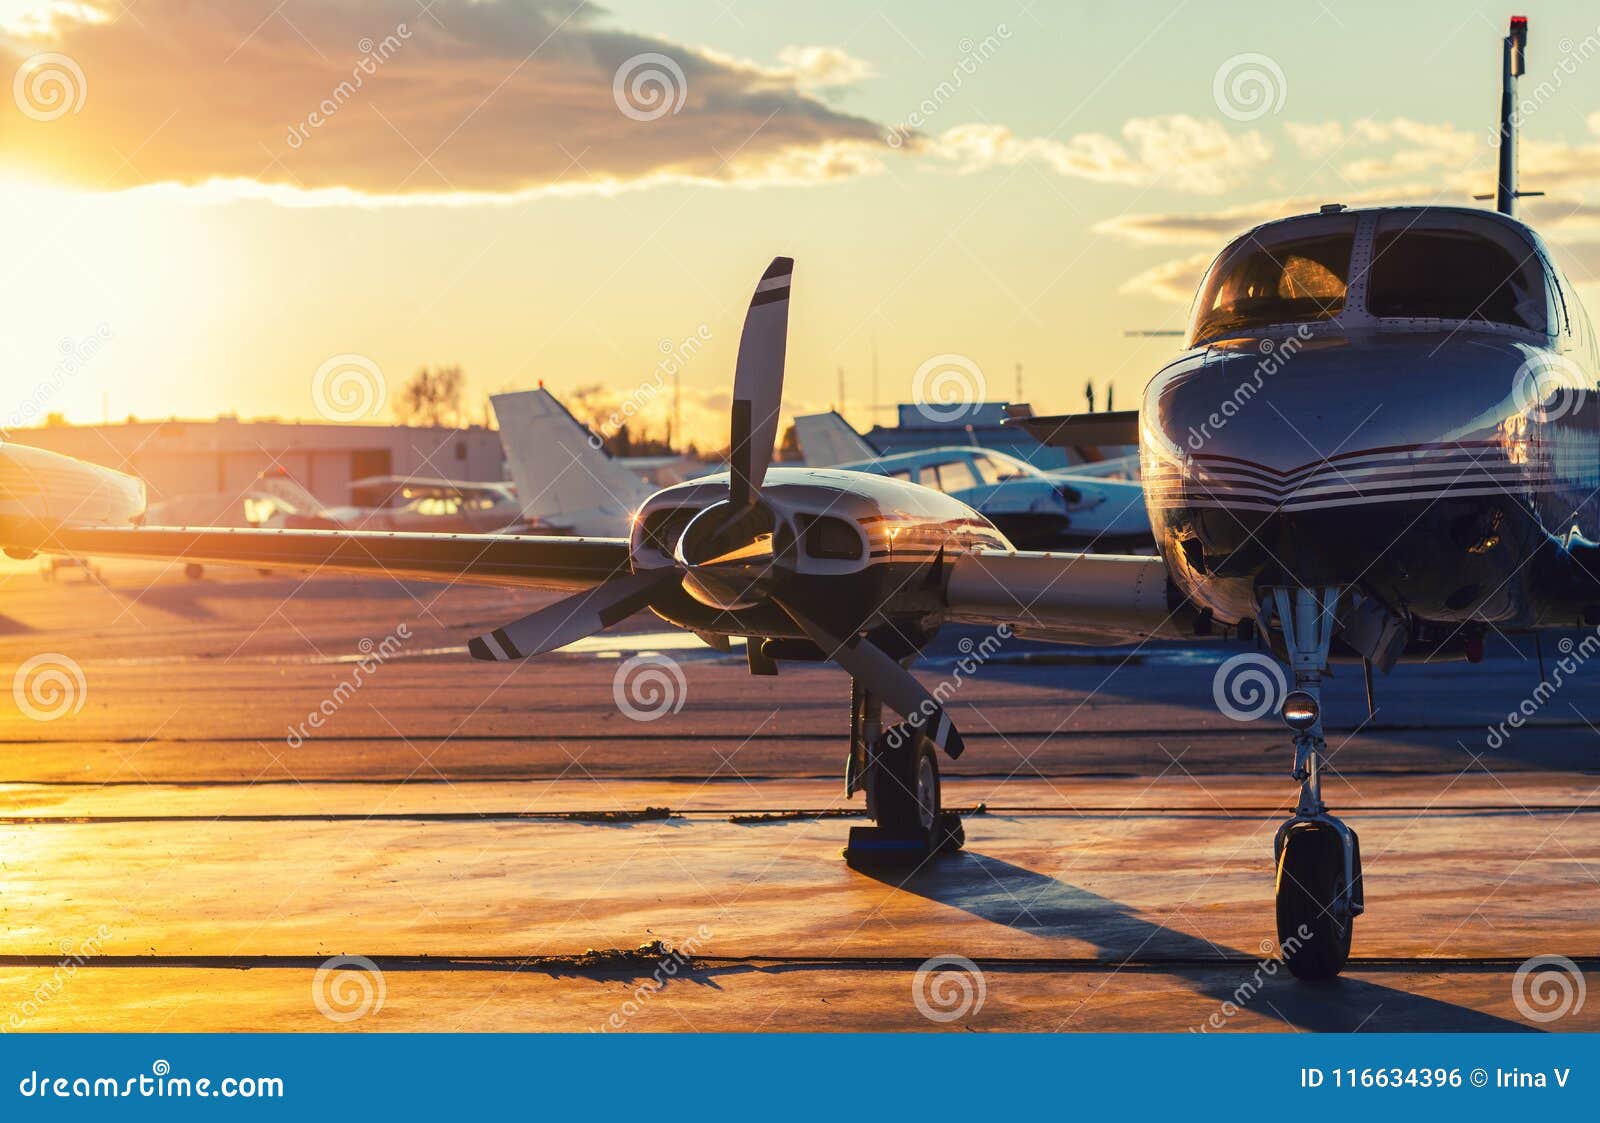 small aviation: private jet is parked on a tarmac in a beautiful